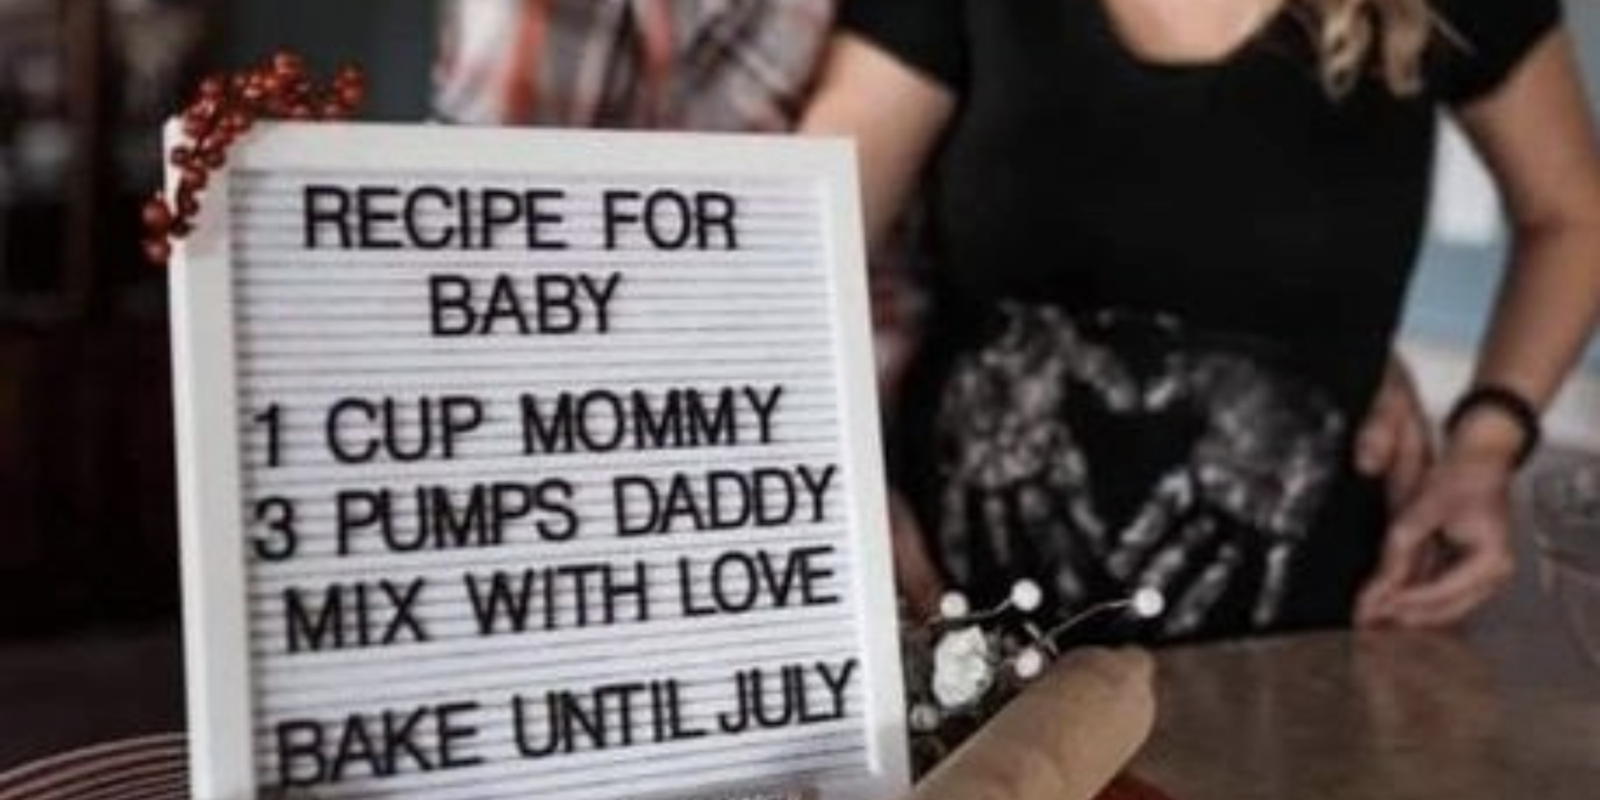 'imagine using your baby announcement to tell the world your husband is bad at sex' a white couple kissing in soft focus behind a sign that says 'Recipe For Baby. 1 Cup Mommy. 3 Pumps Daddy. Mix With Love. Bake Until July.'